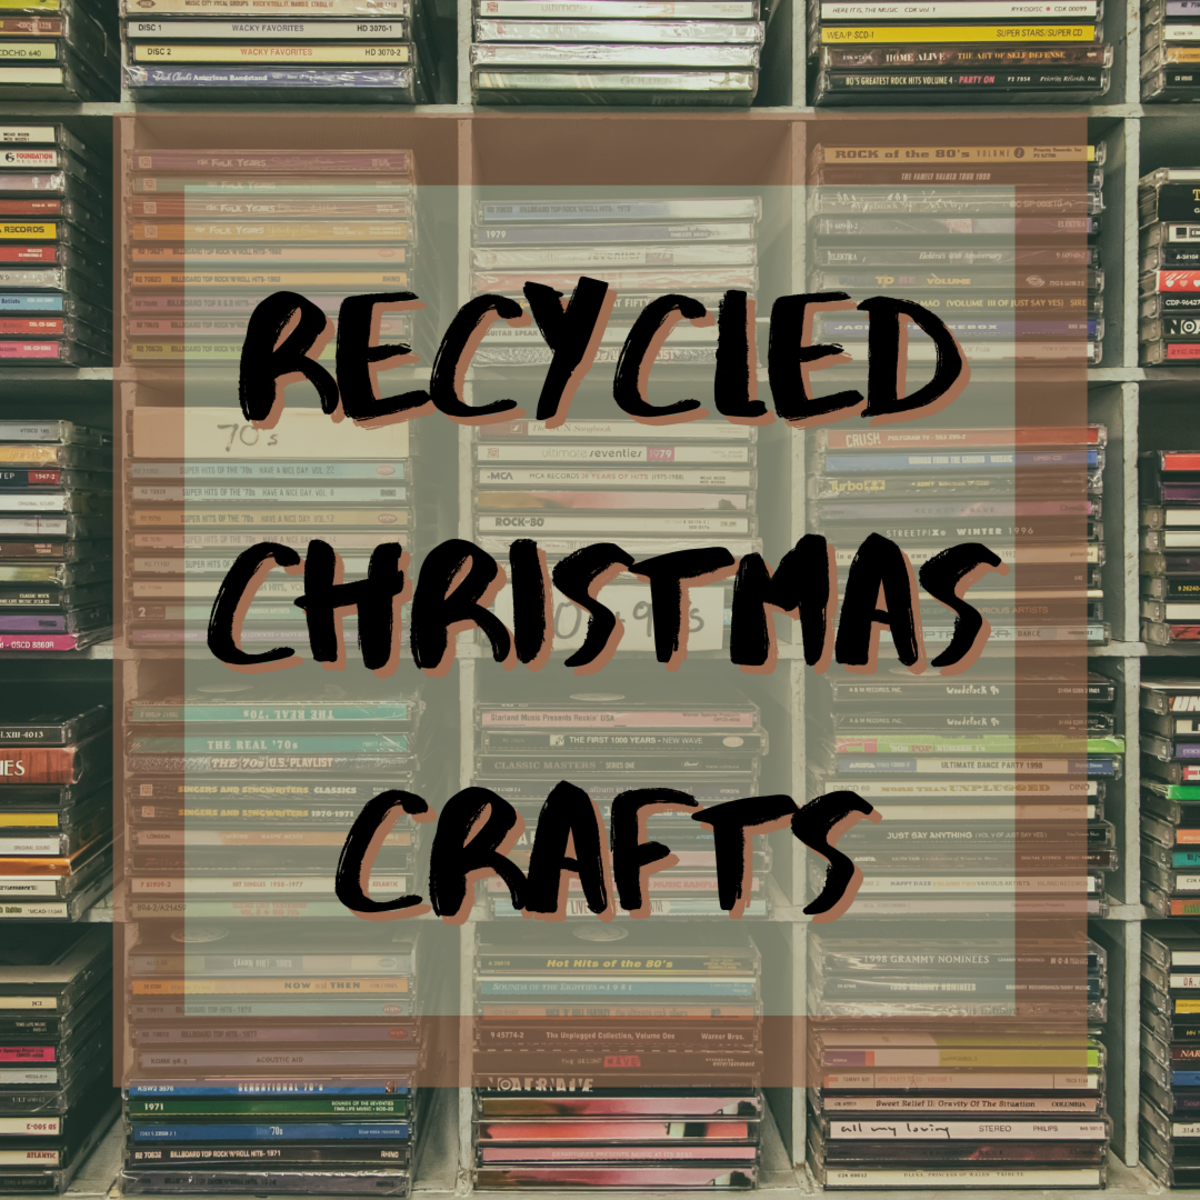 Learn a few ideas of how to upcycle old items into fun and unique Christmas crafts and gifts! You can stretch your dollar while helping the environment!